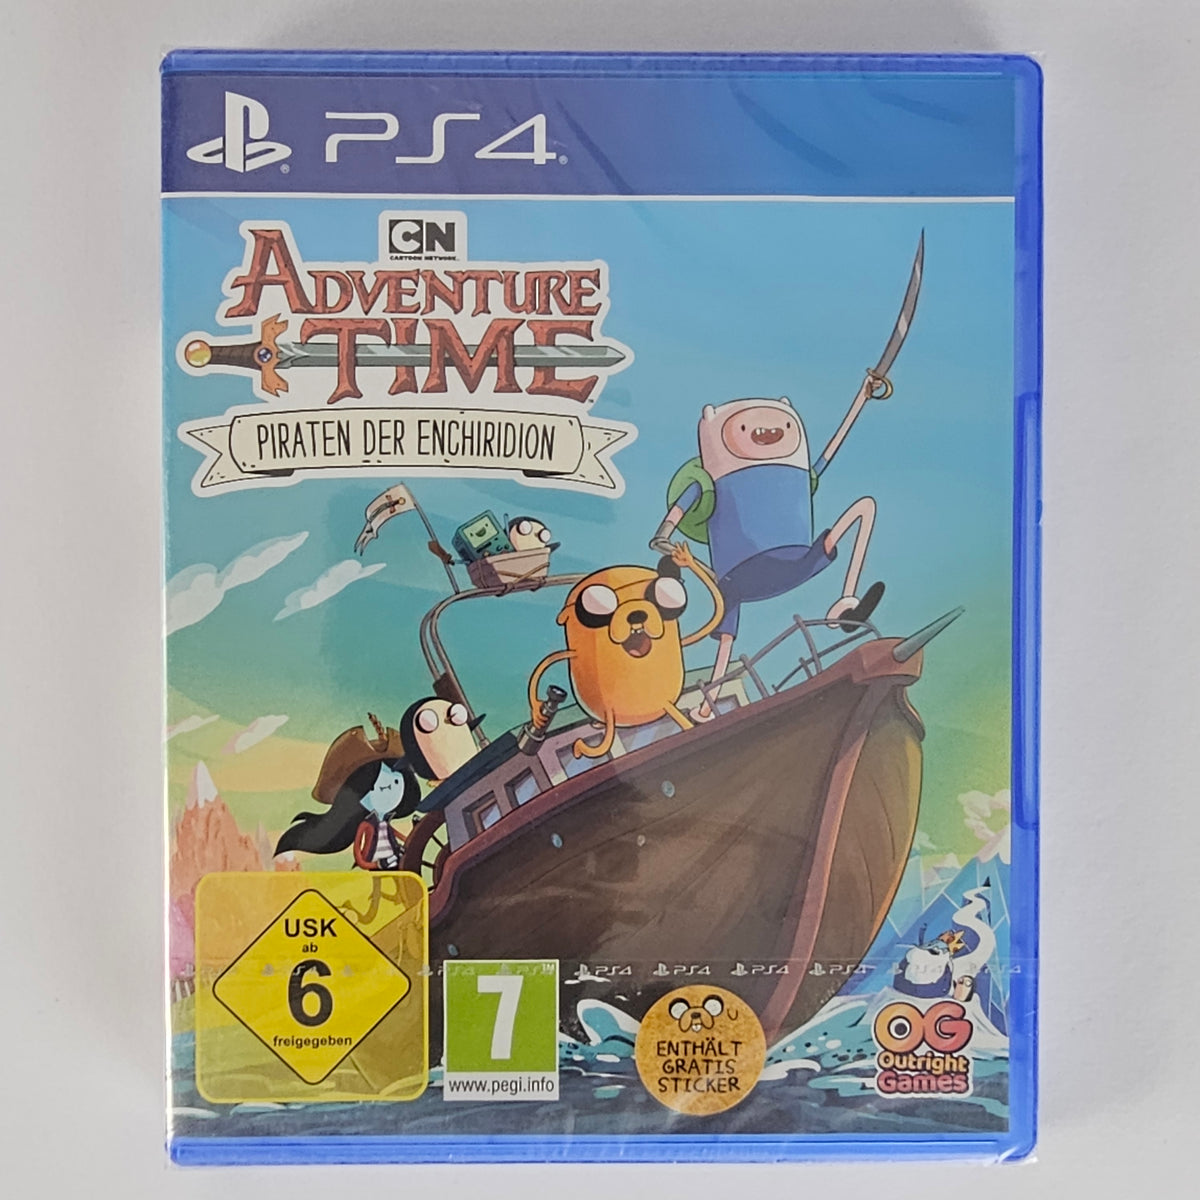 Adventure Time: Pirats of the Enc [PS4]